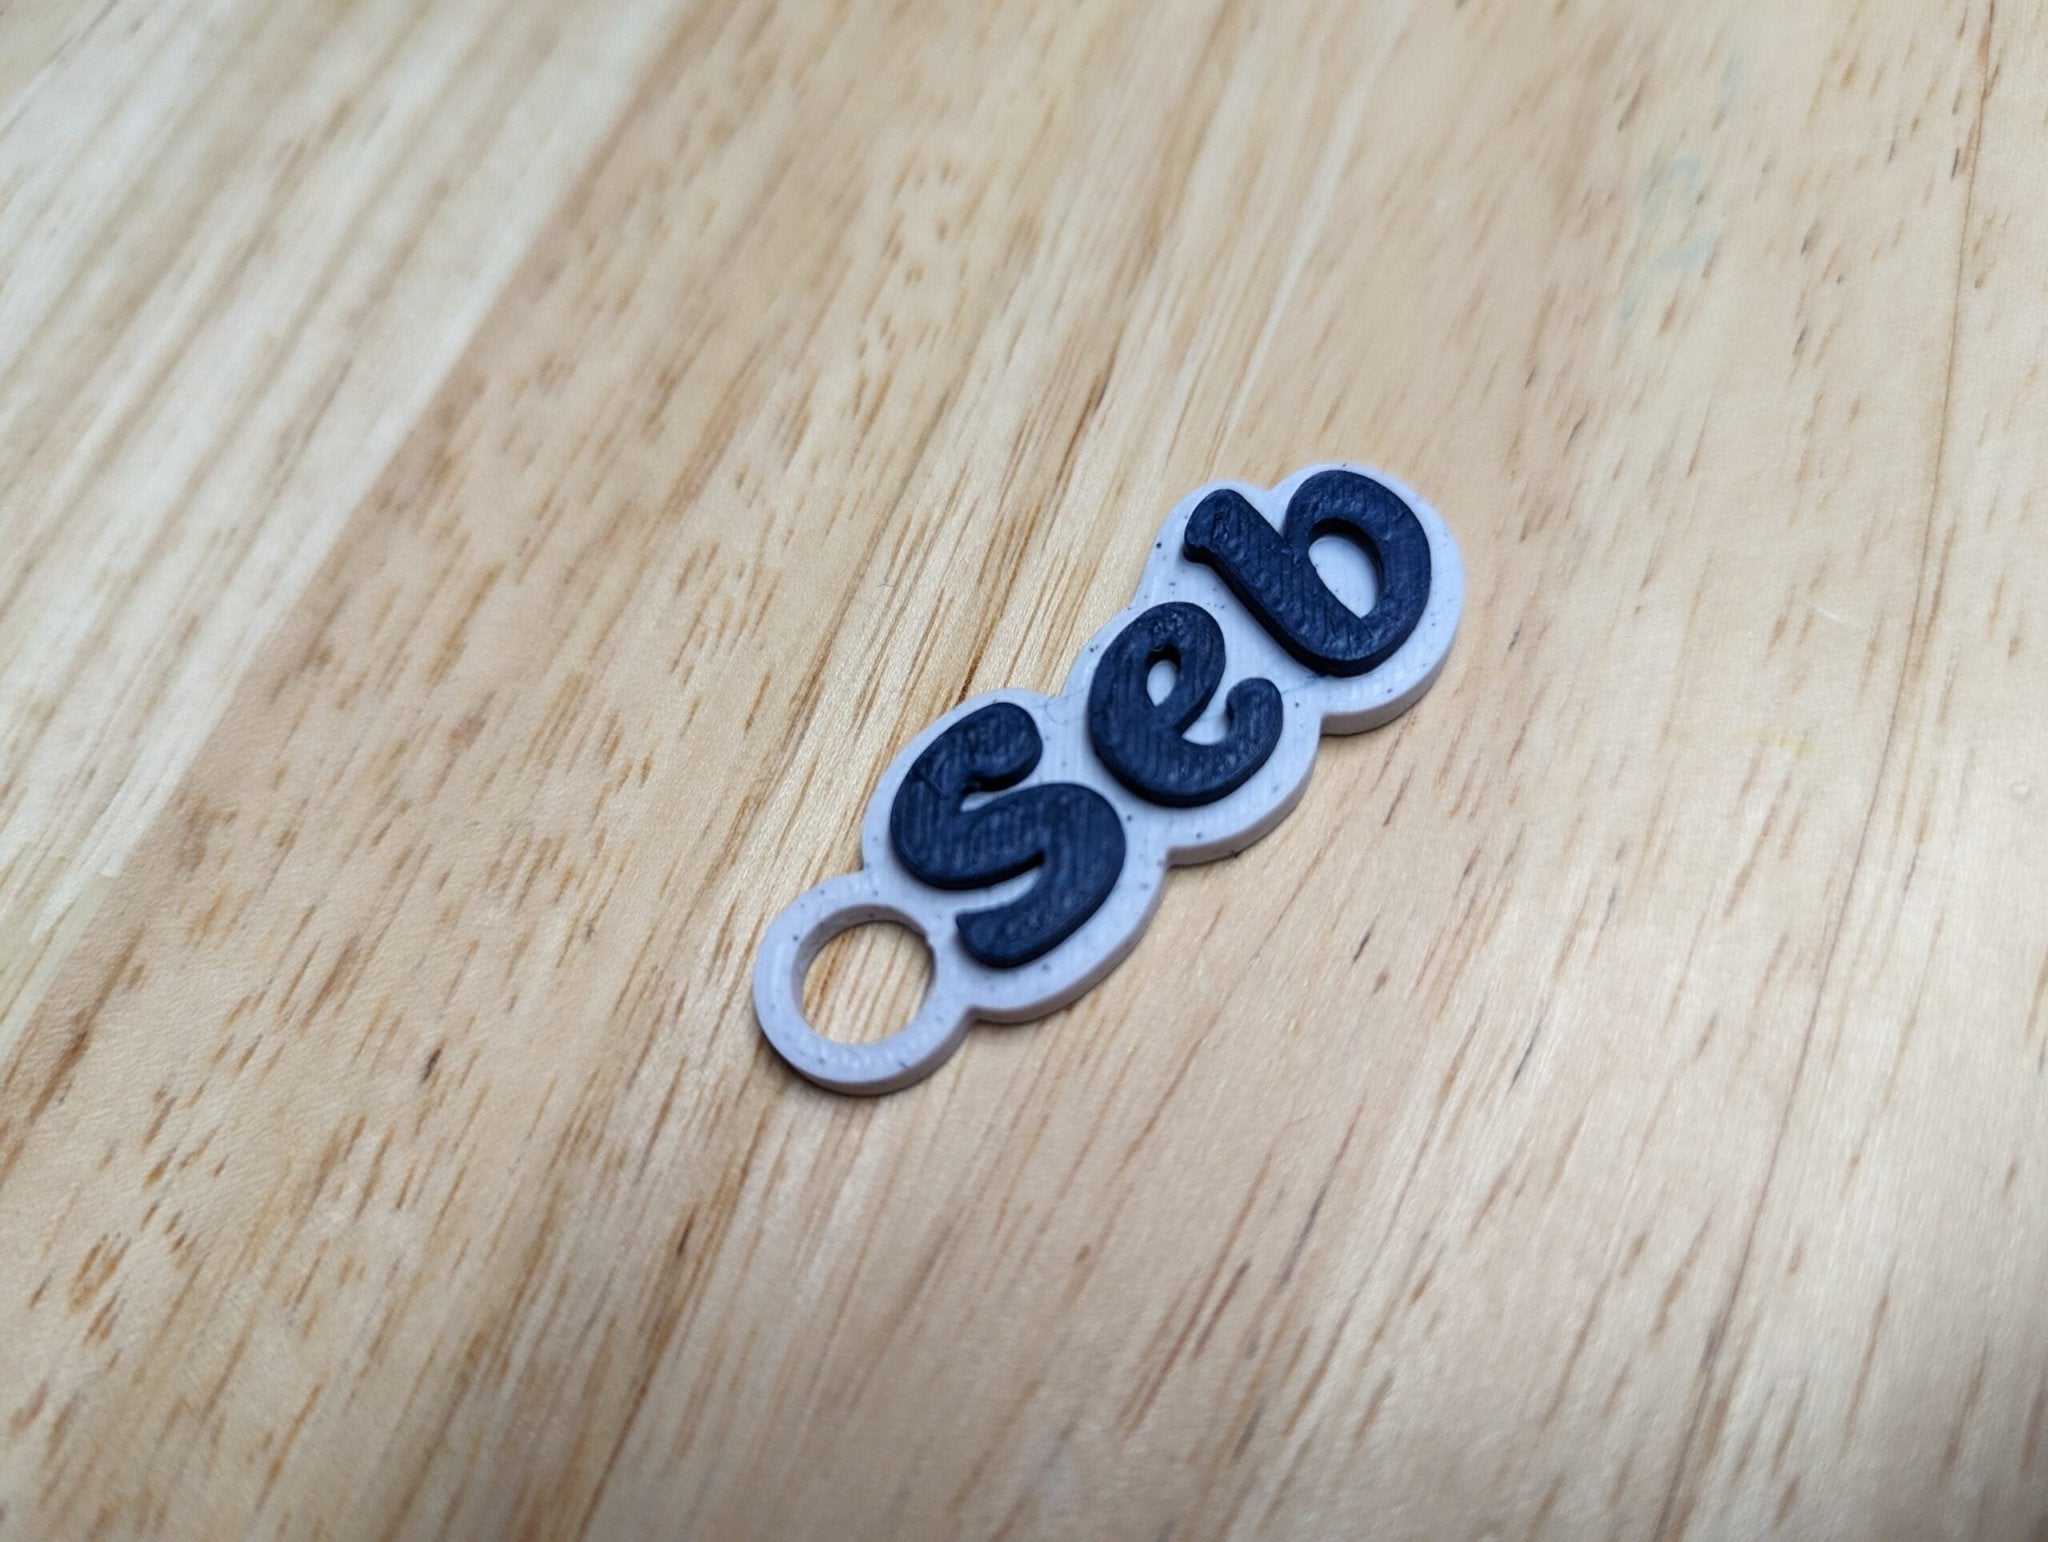 How to create a name tag key ring in Fusion 360 - 3docity